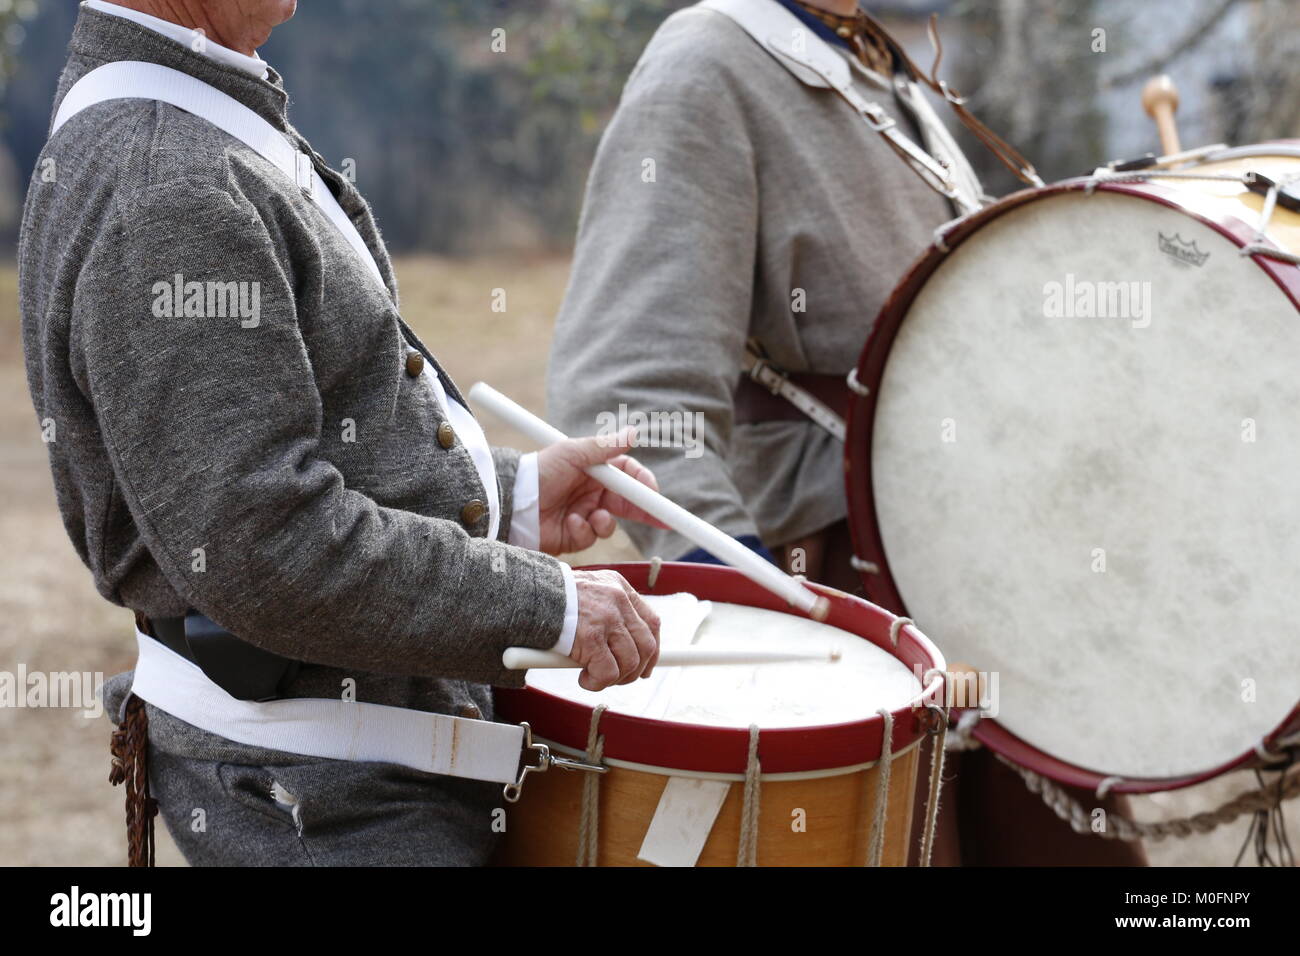 Confederate marching drummers at a Civil War Re-enactment of a battle that happened in Hernando County, Florida in July of l864. Stock Photo